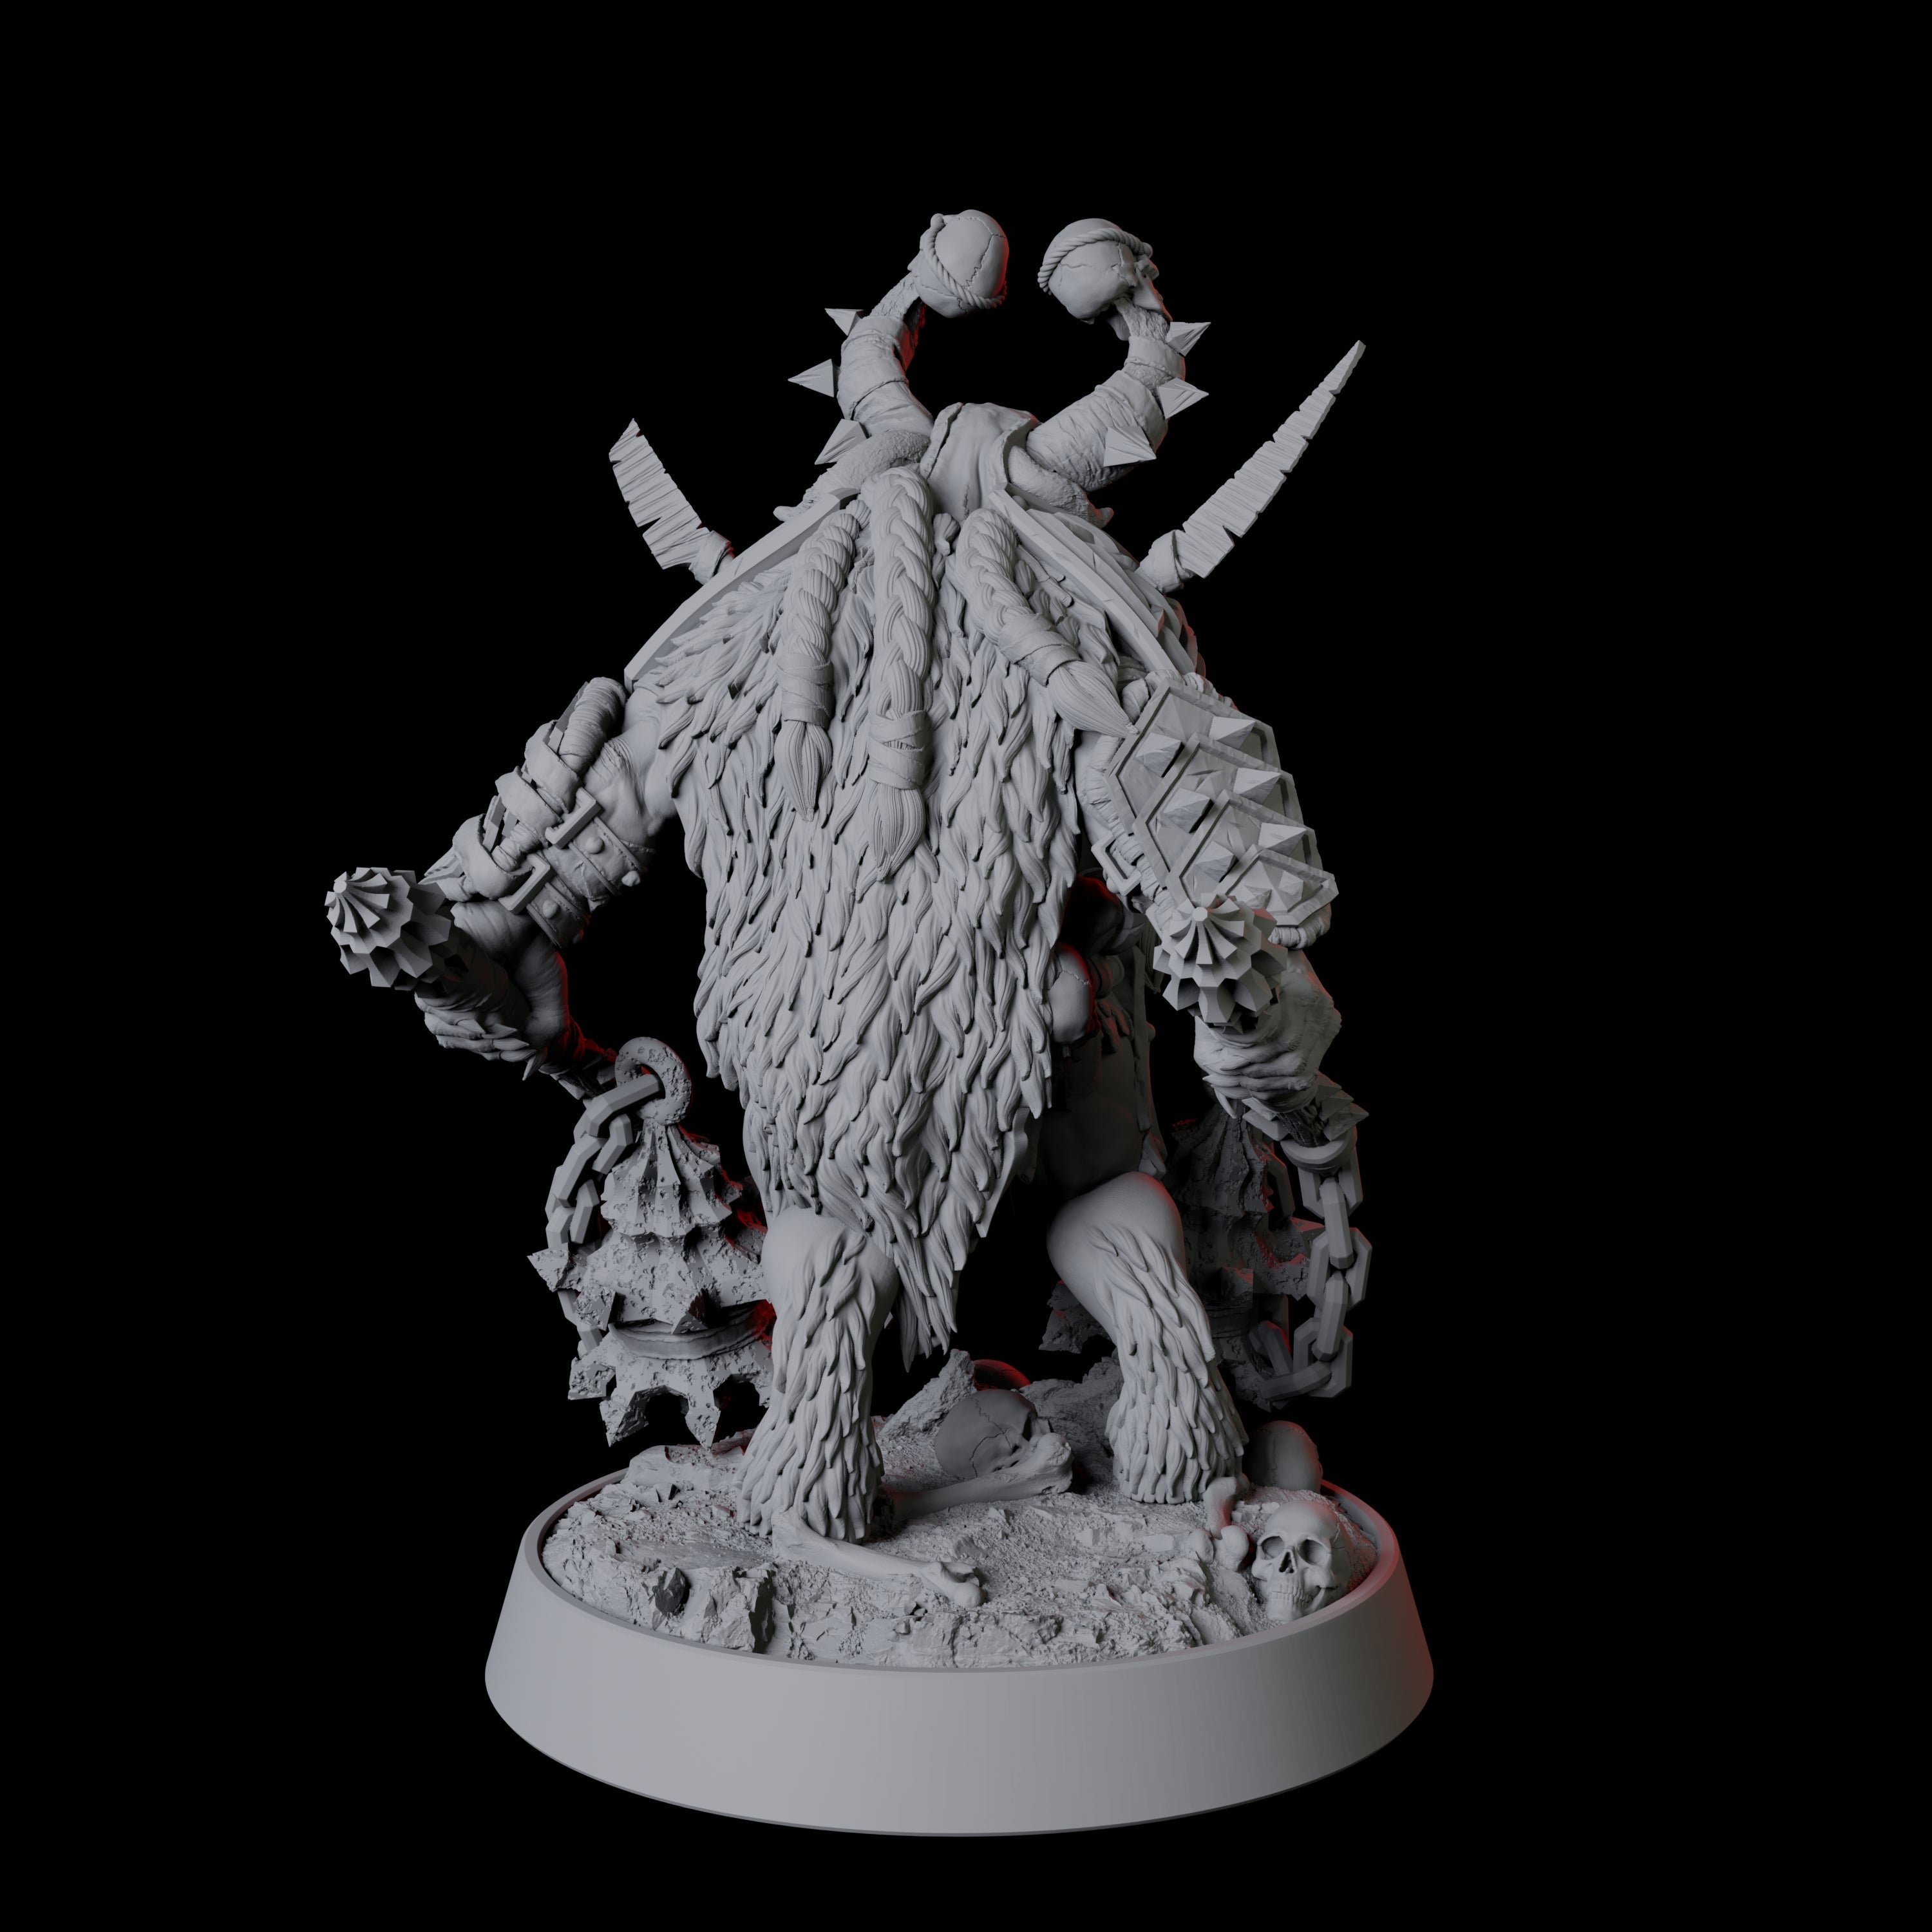 Hulking Death Minotaur Miniature for Dungeons and Dragons